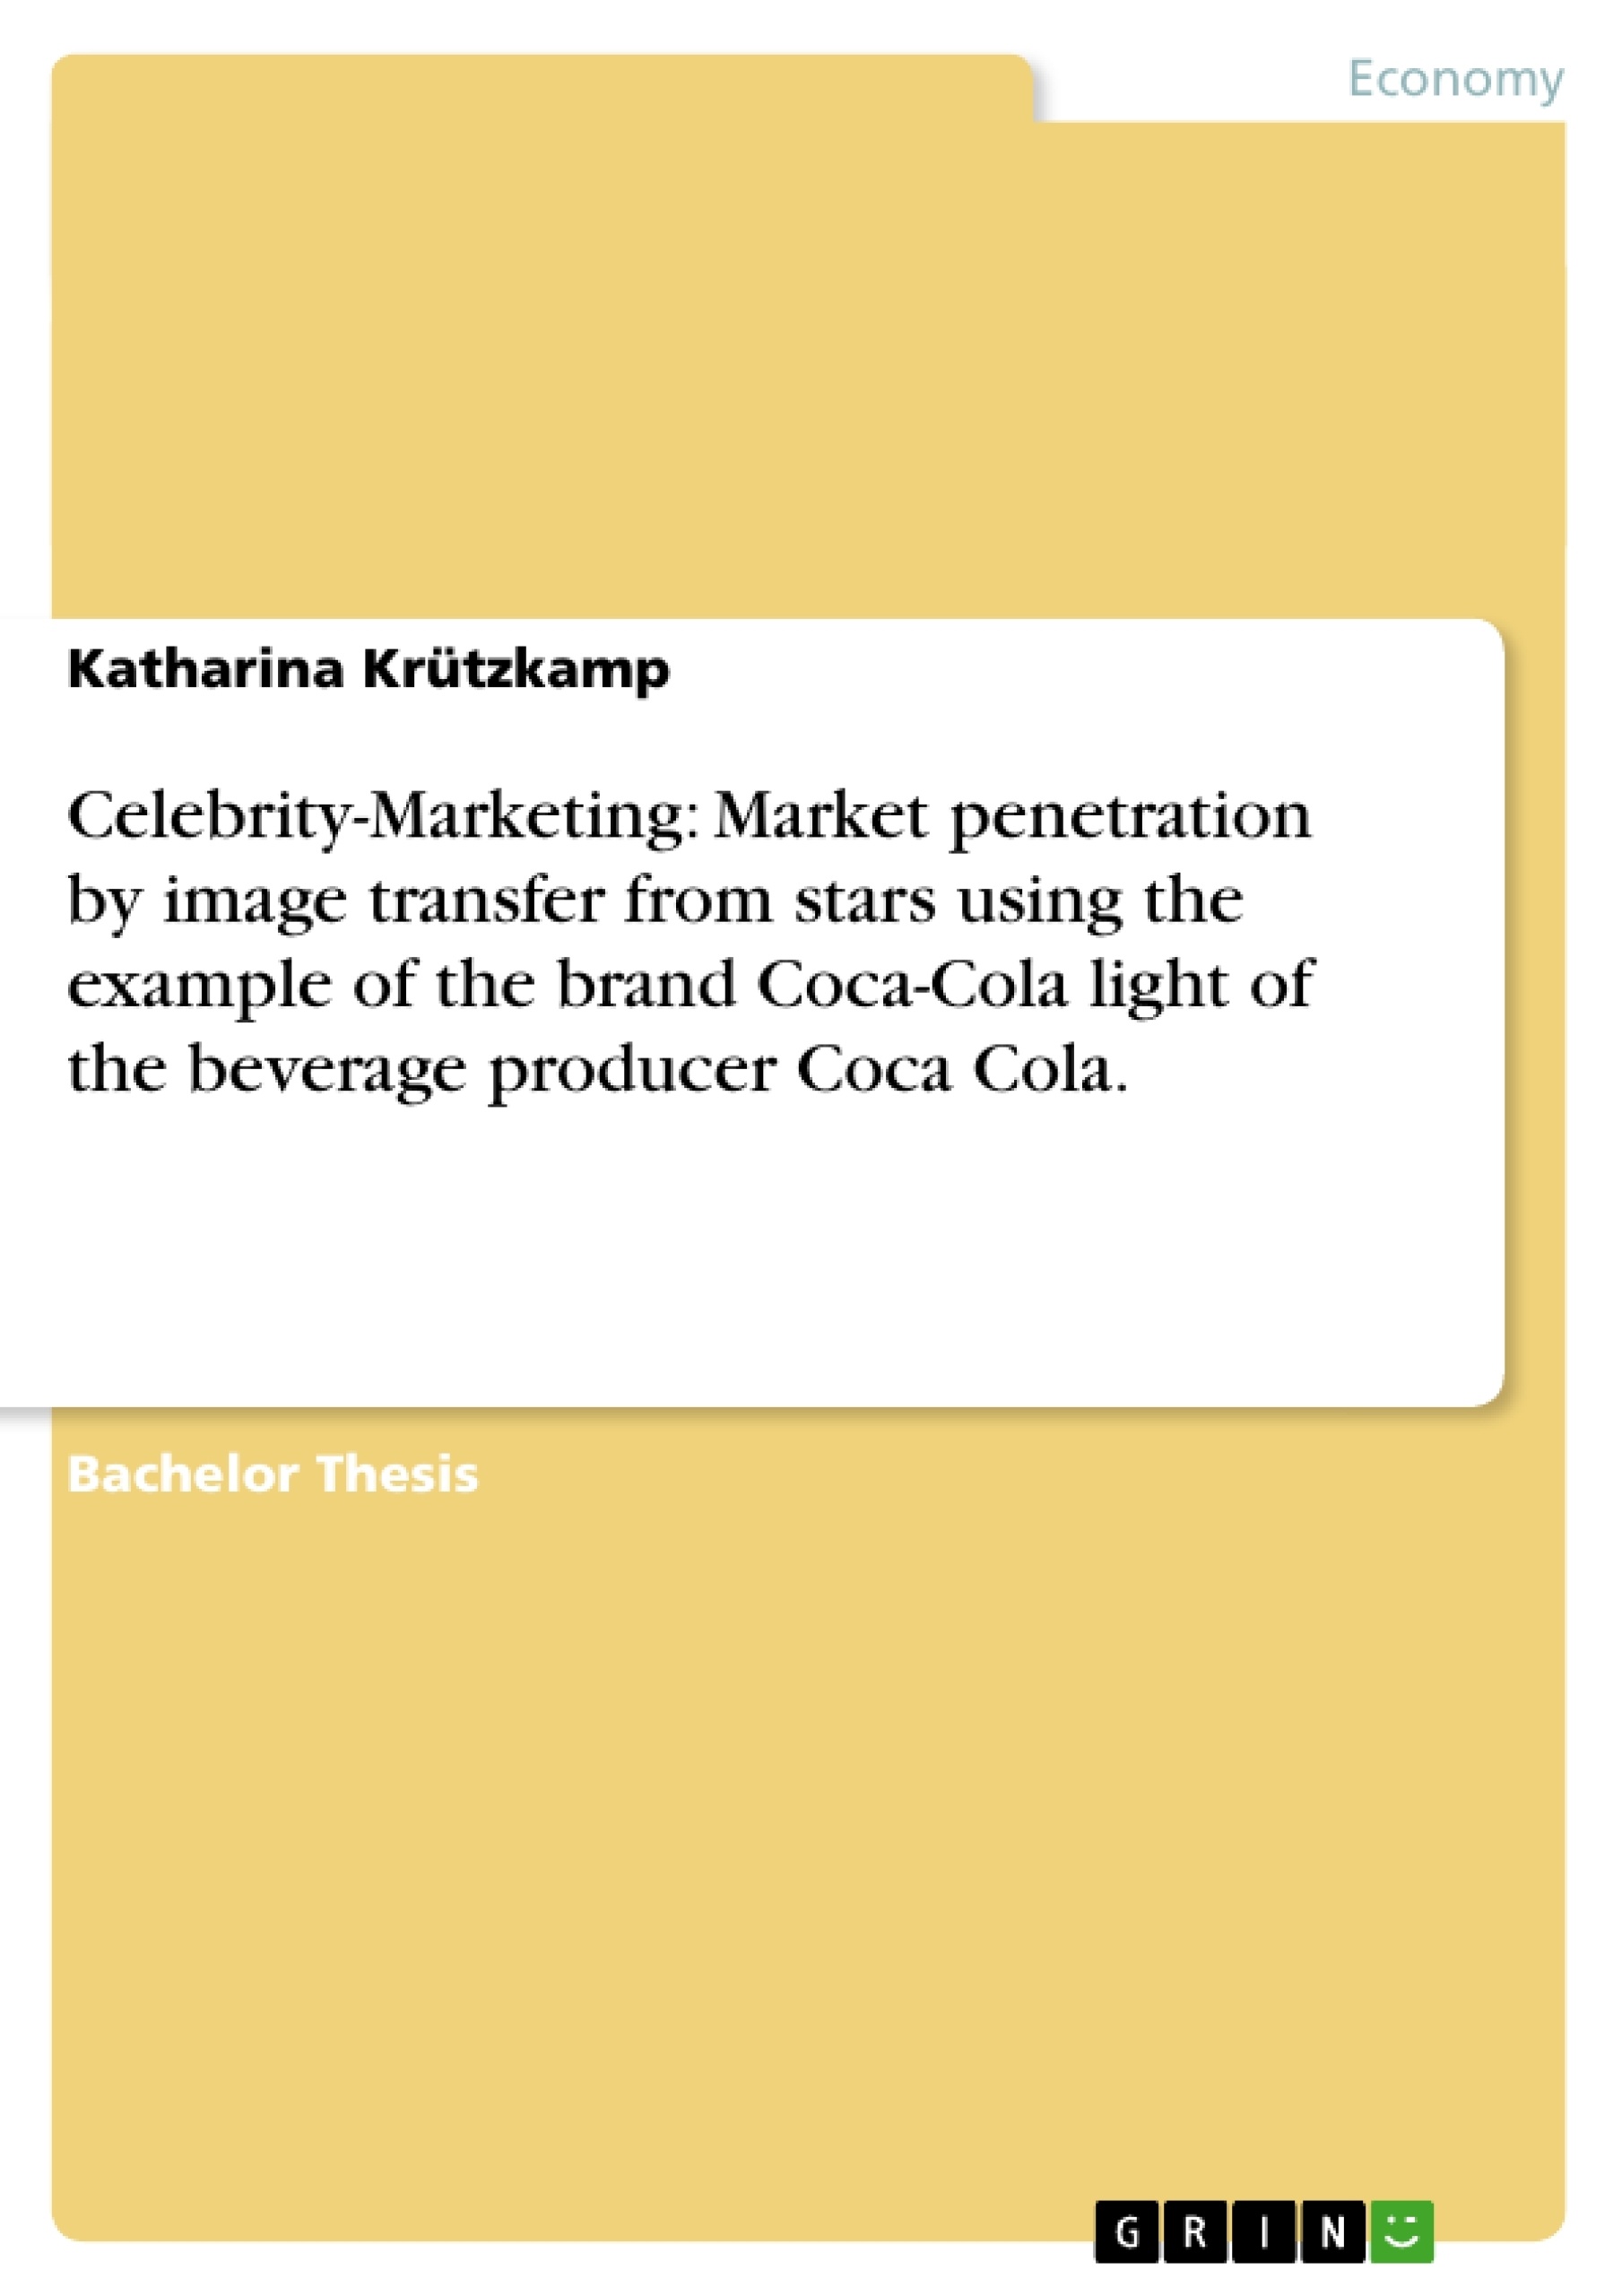 Titel: Celebrity-Marketing: Market penetration by image transfer from stars using the example of the brand Coca-Cola light of the beverage producer Coca Cola.